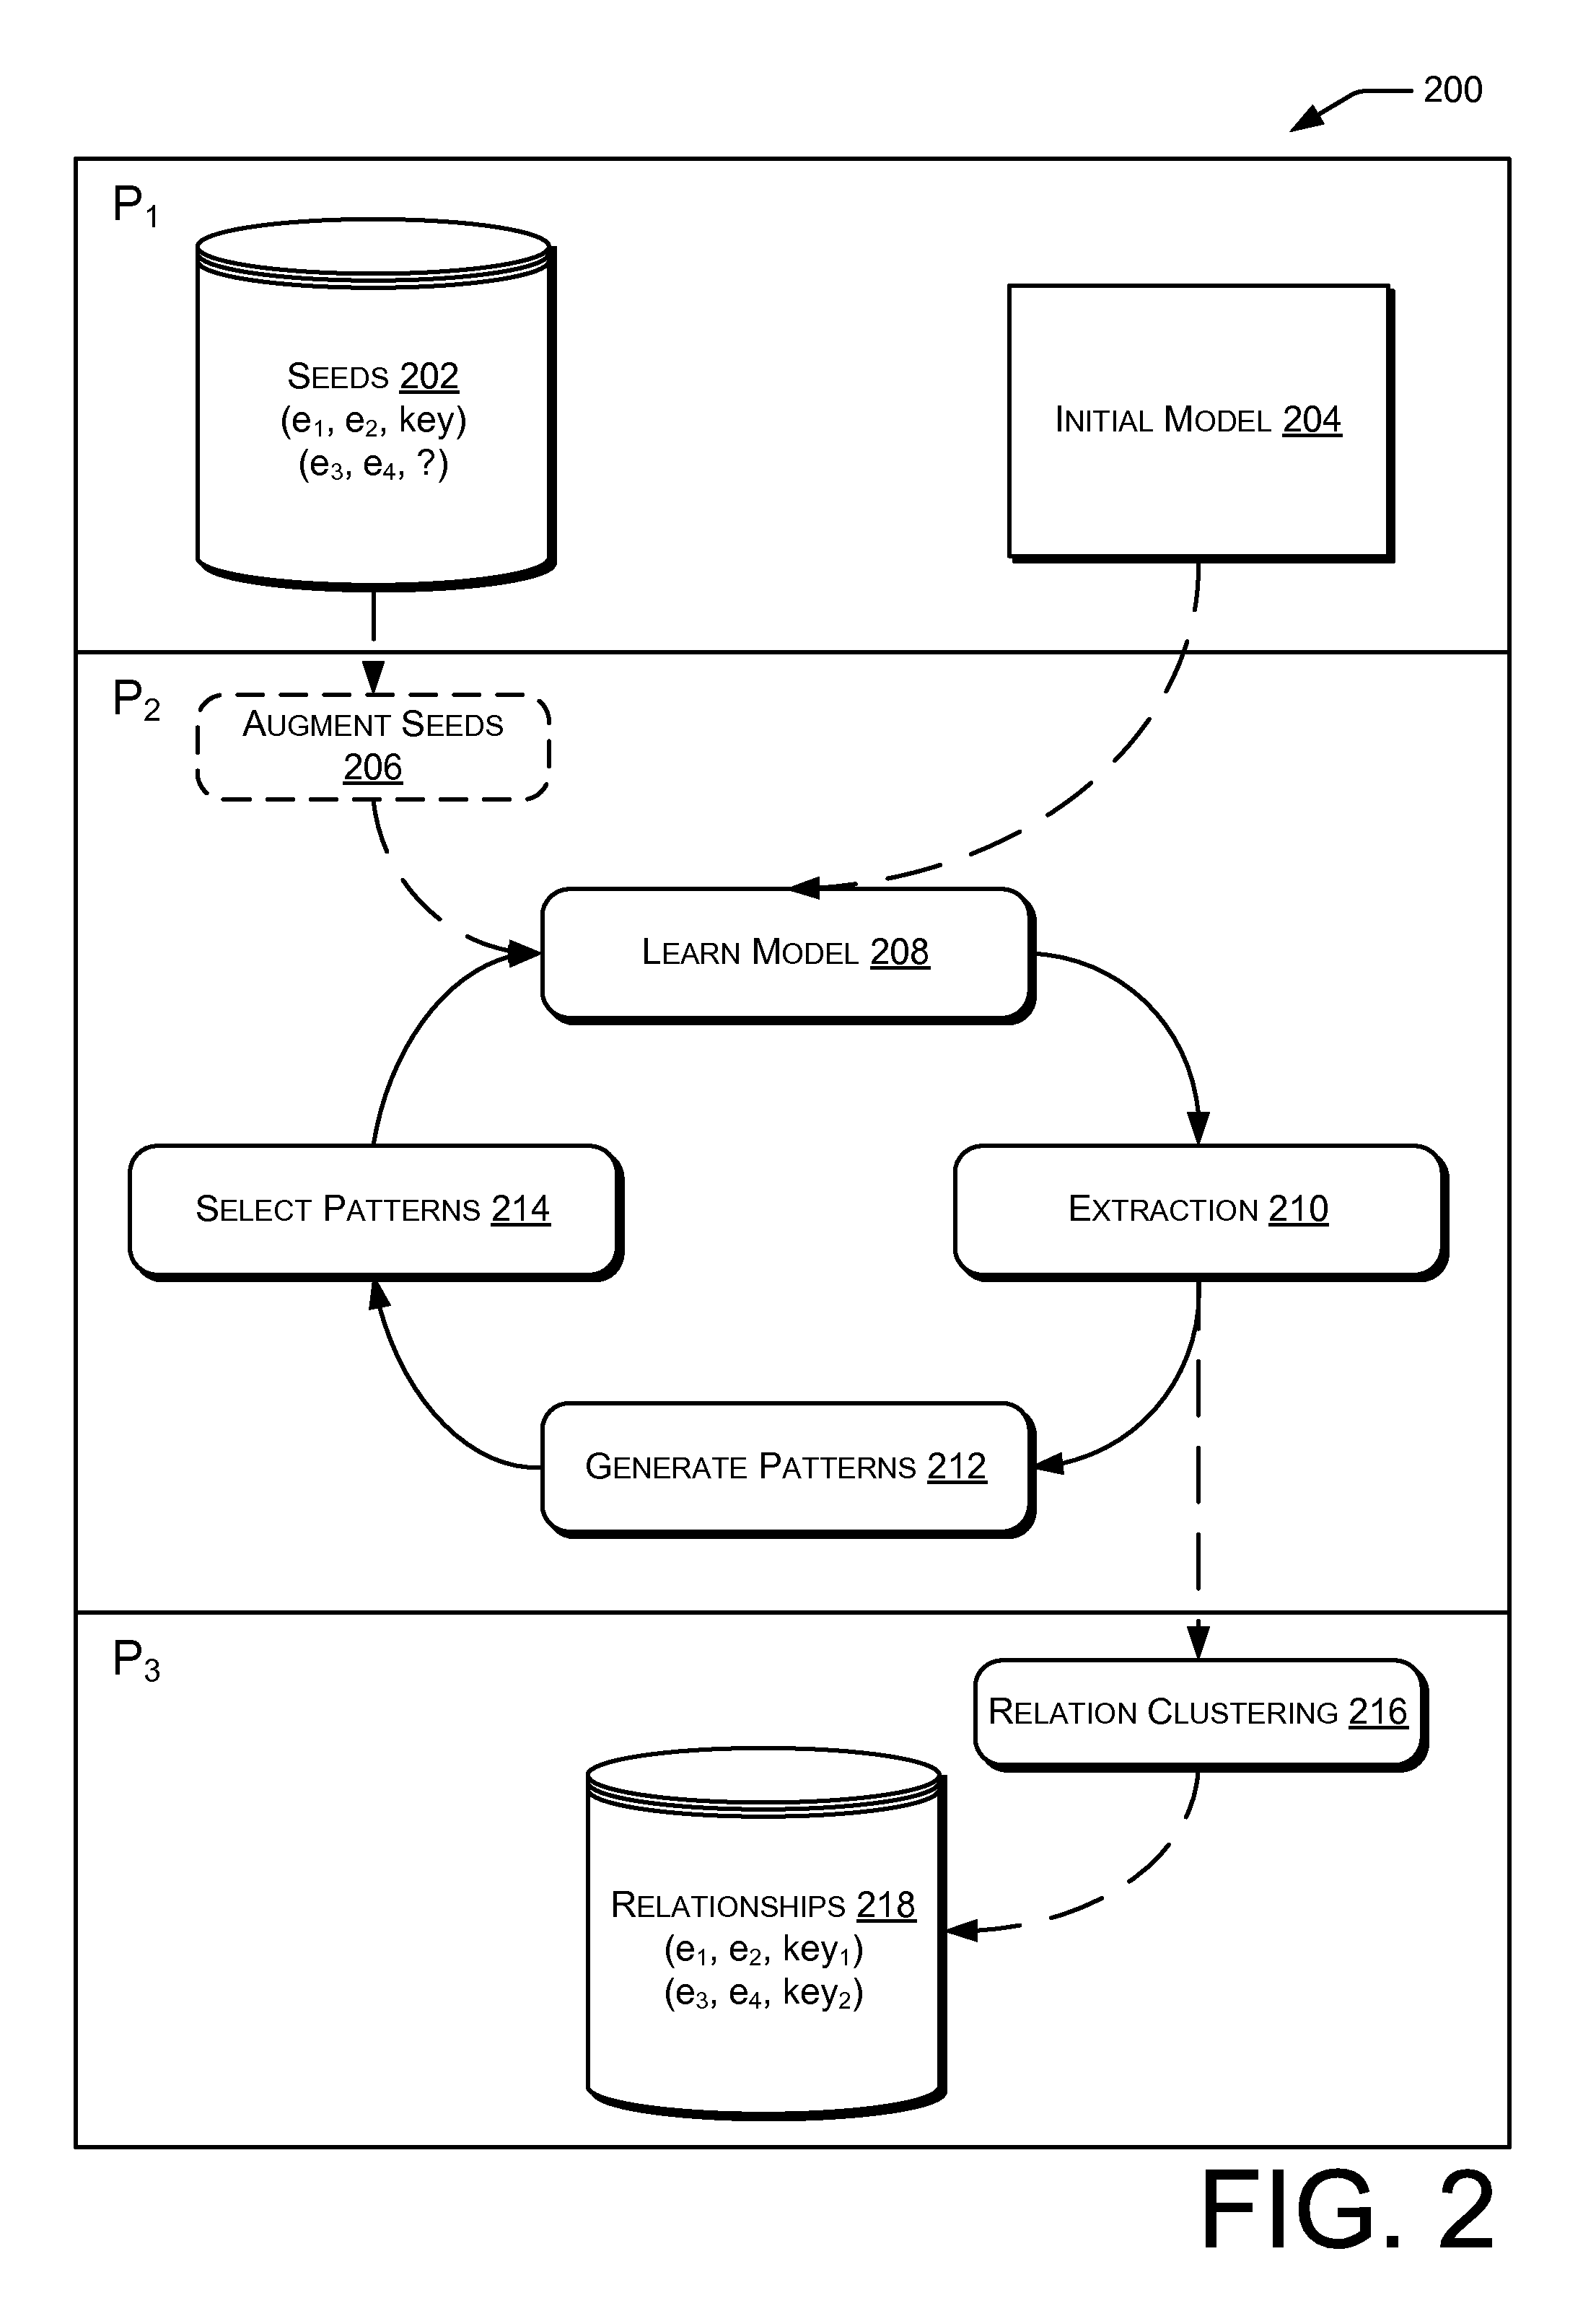 Web-scale entity relationship extraction that extracts pattern(s) based on an extracted tuple